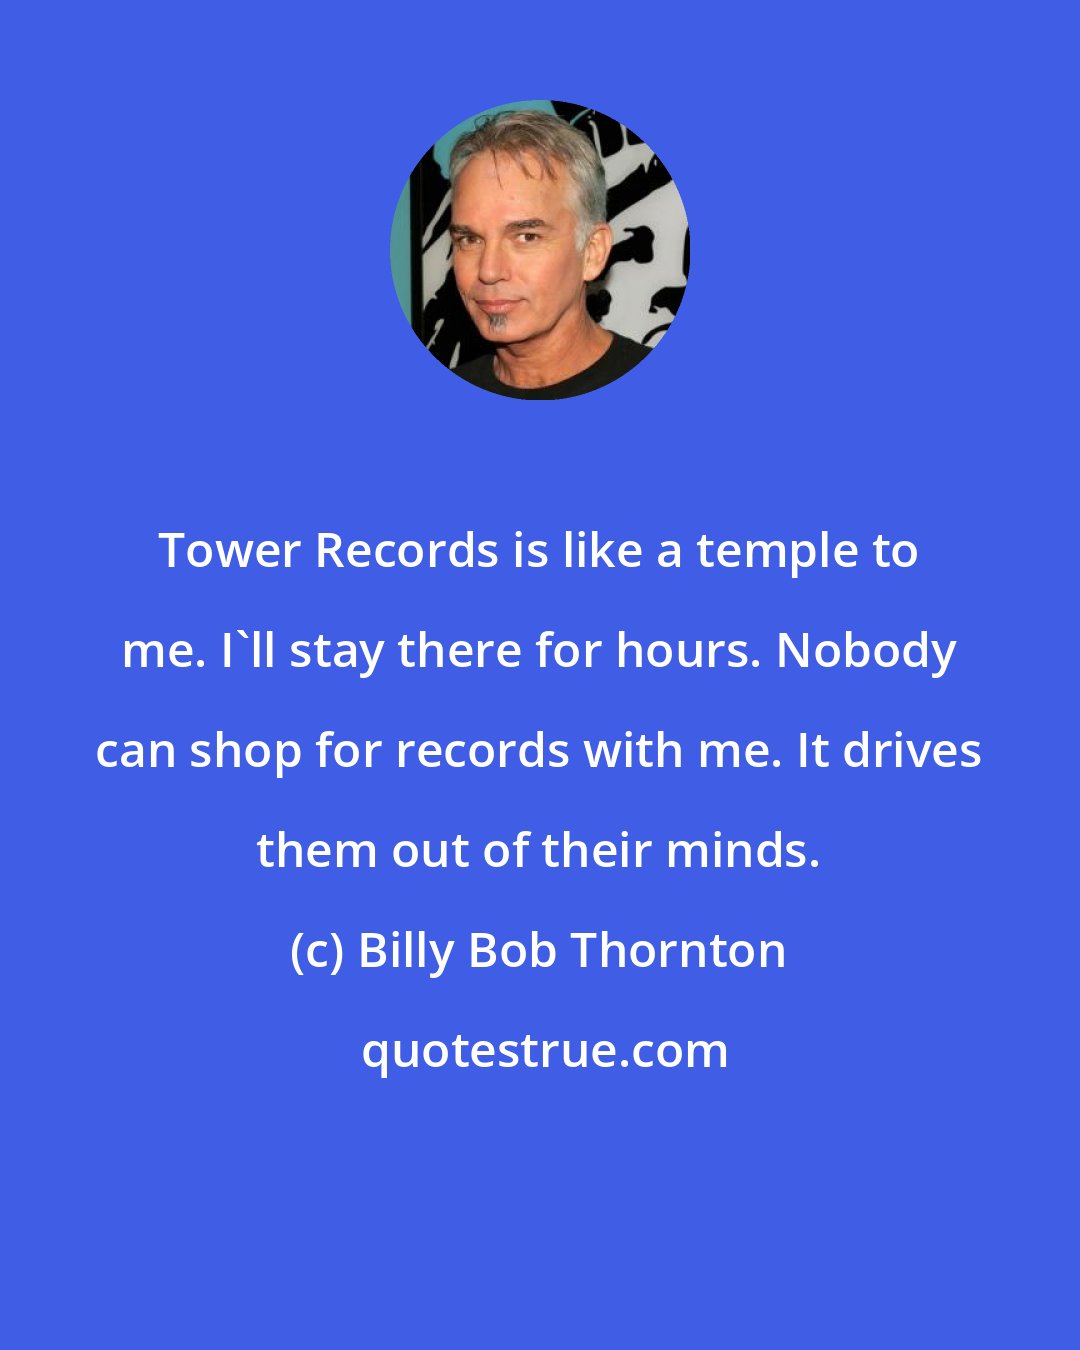 Billy Bob Thornton: Tower Records is like a temple to me. I'll stay there for hours. Nobody can shop for records with me. It drives them out of their minds.